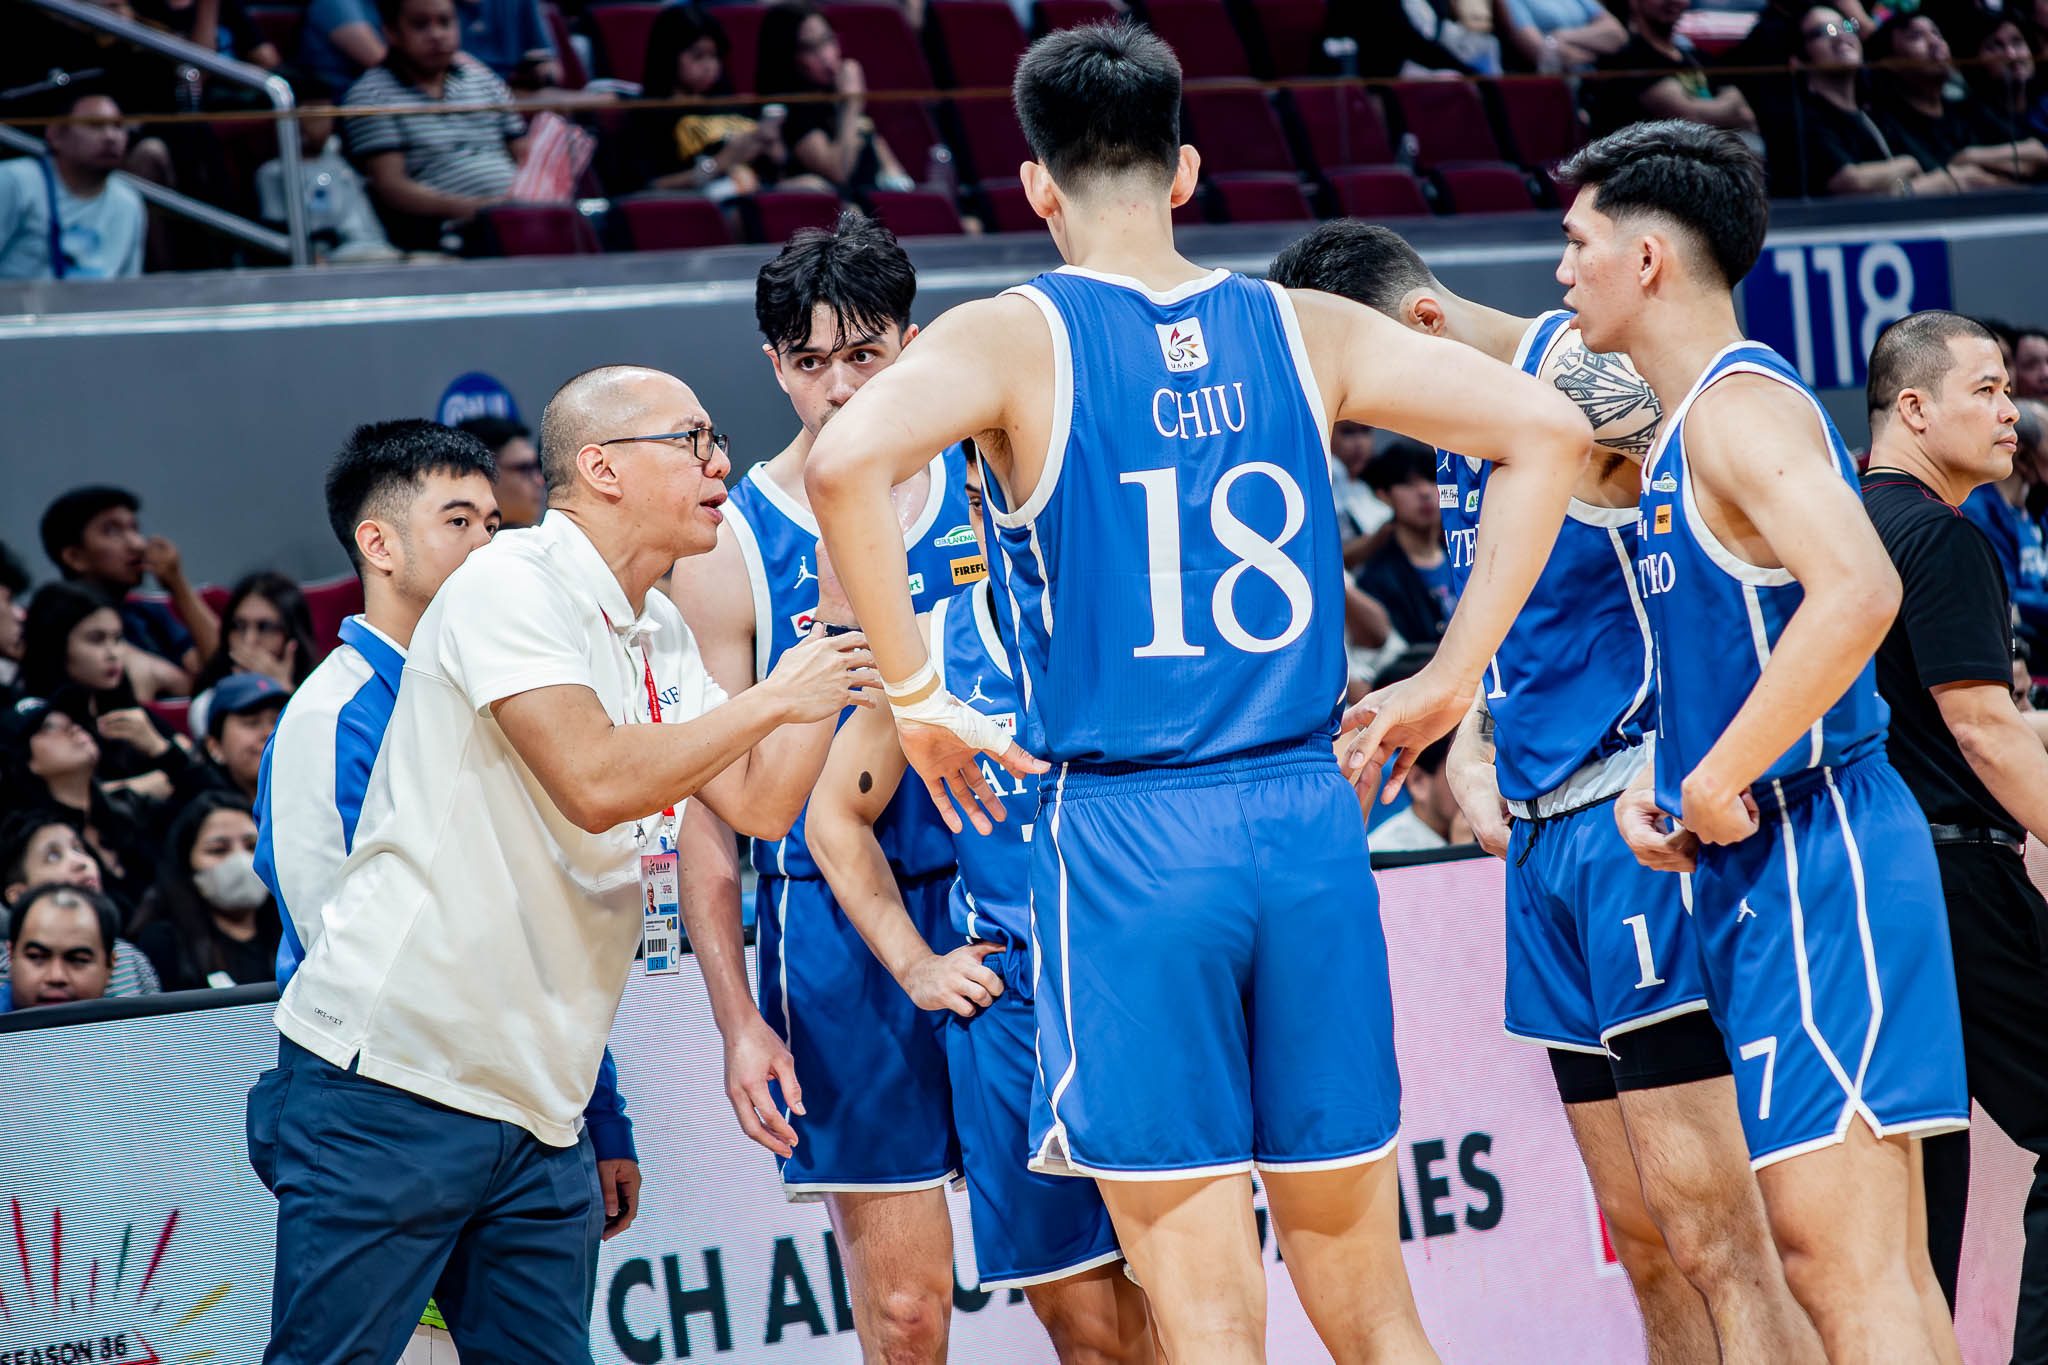 UAAP champion Ateneo keen on blocking ‘outside noise’ as skid reaches 10-year worst